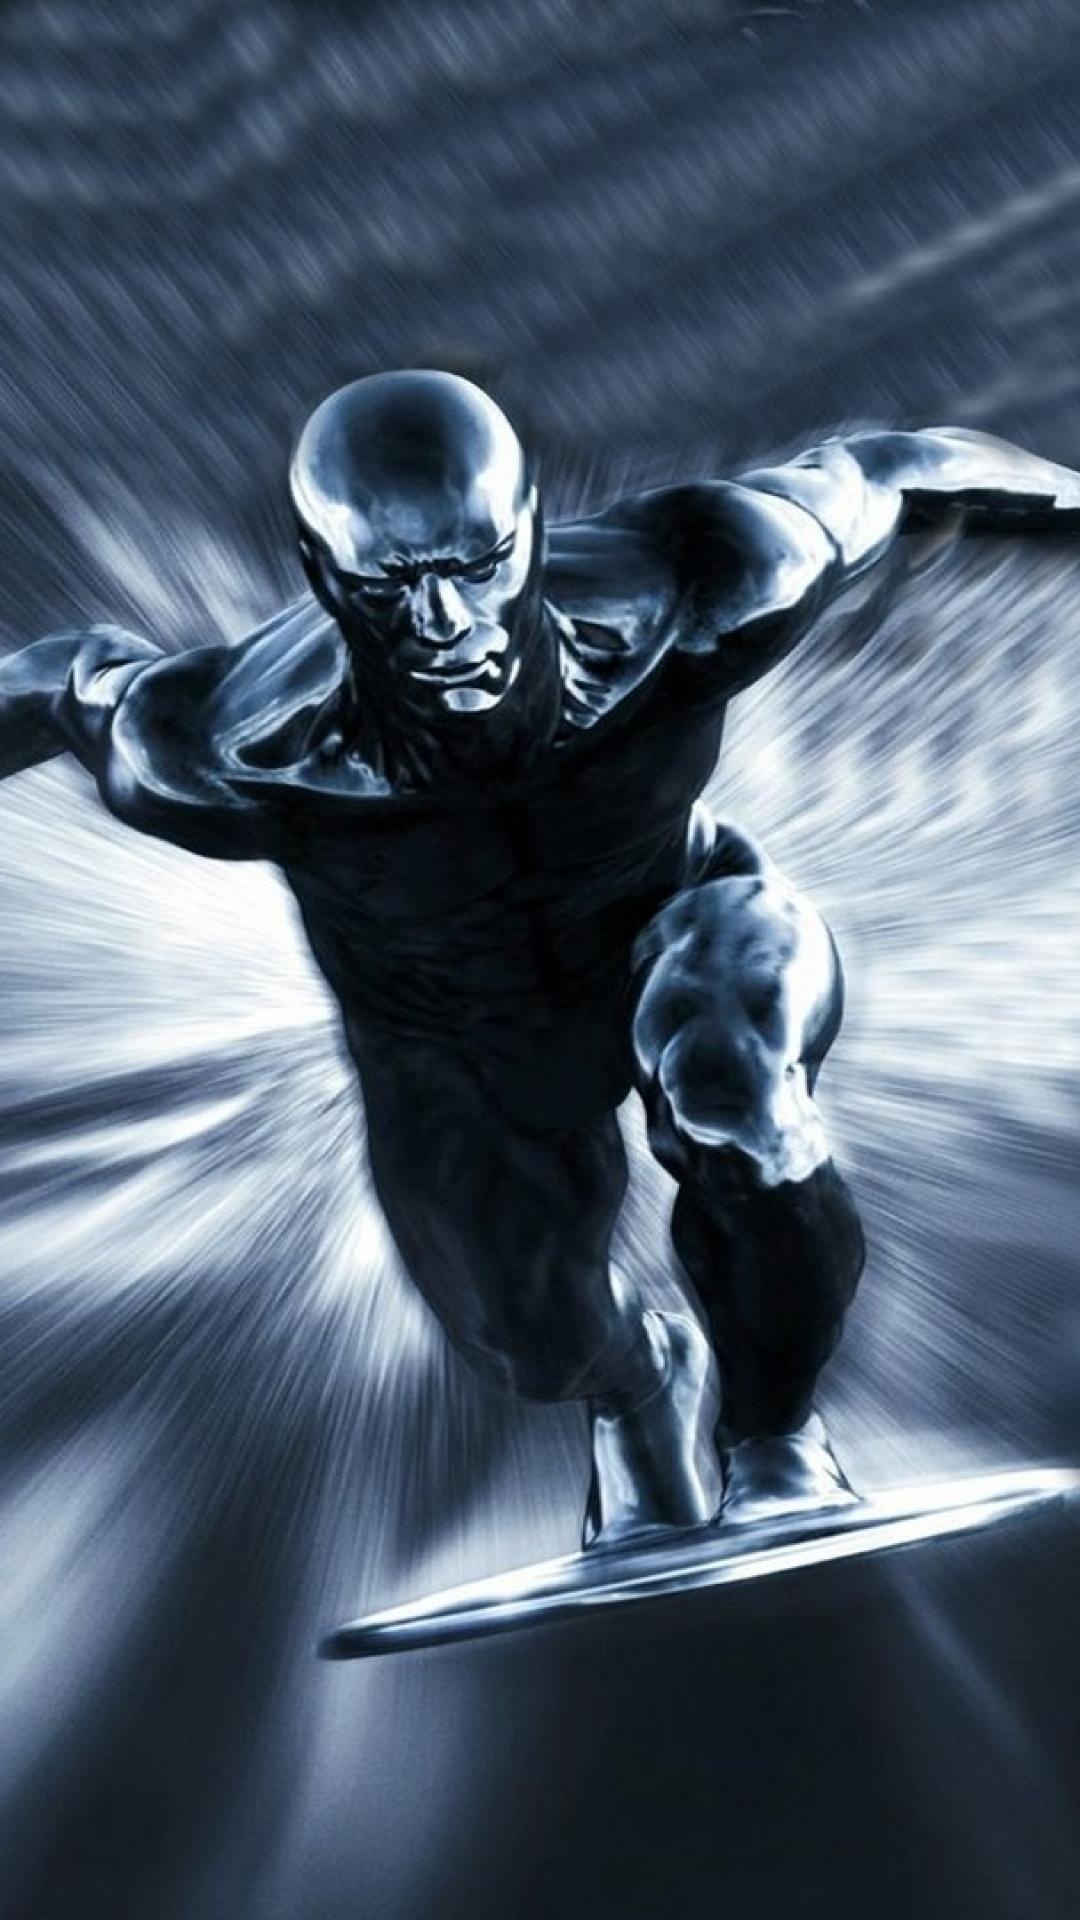 Silver Surfer wallpapers, Backgrounds, 1080x1920 Full HD Handy